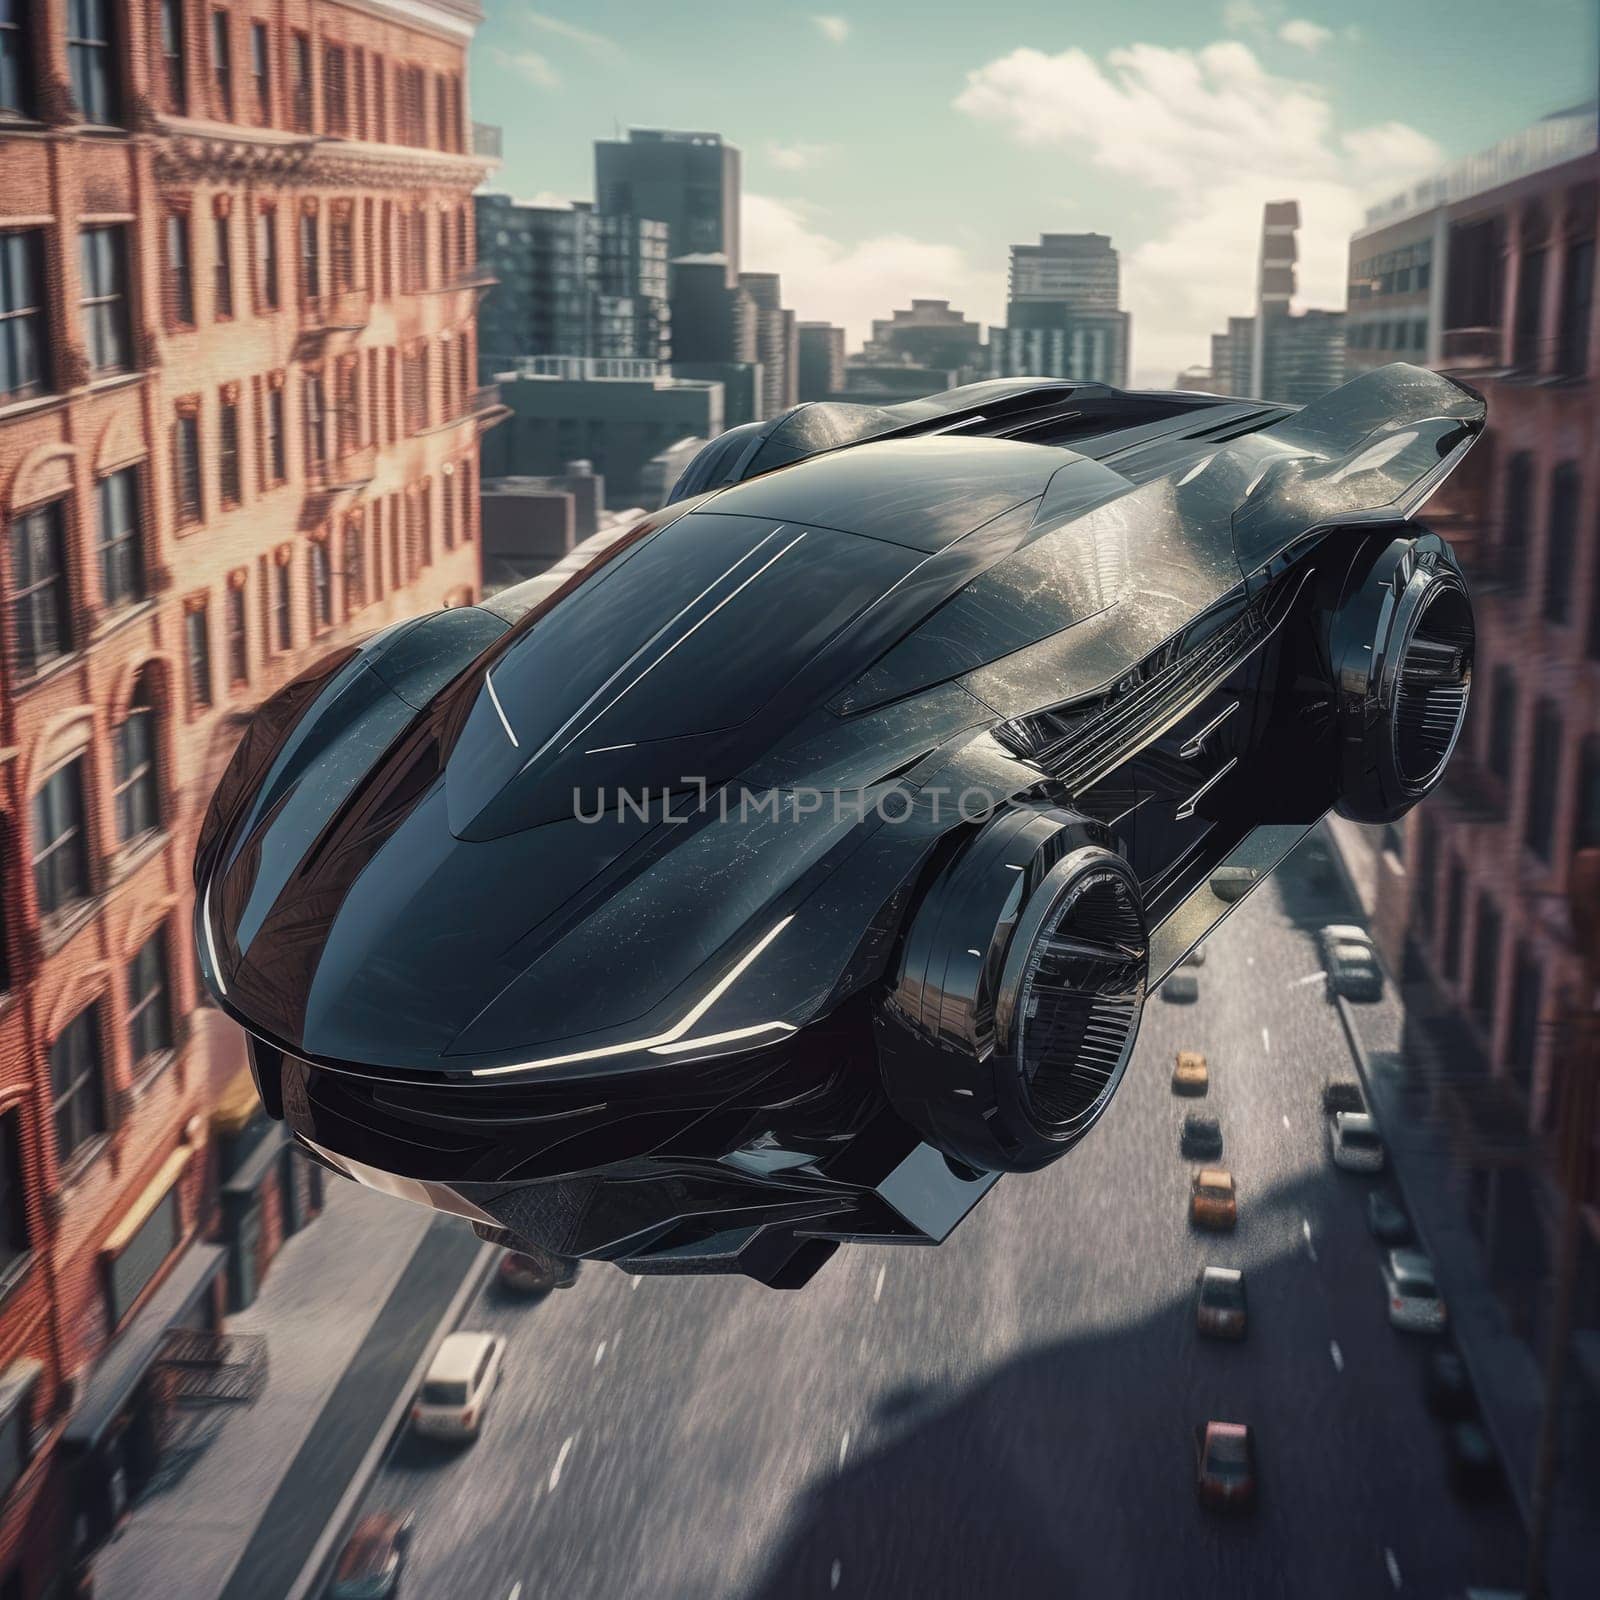 The flying car of the future flies in the city. A vision for the future